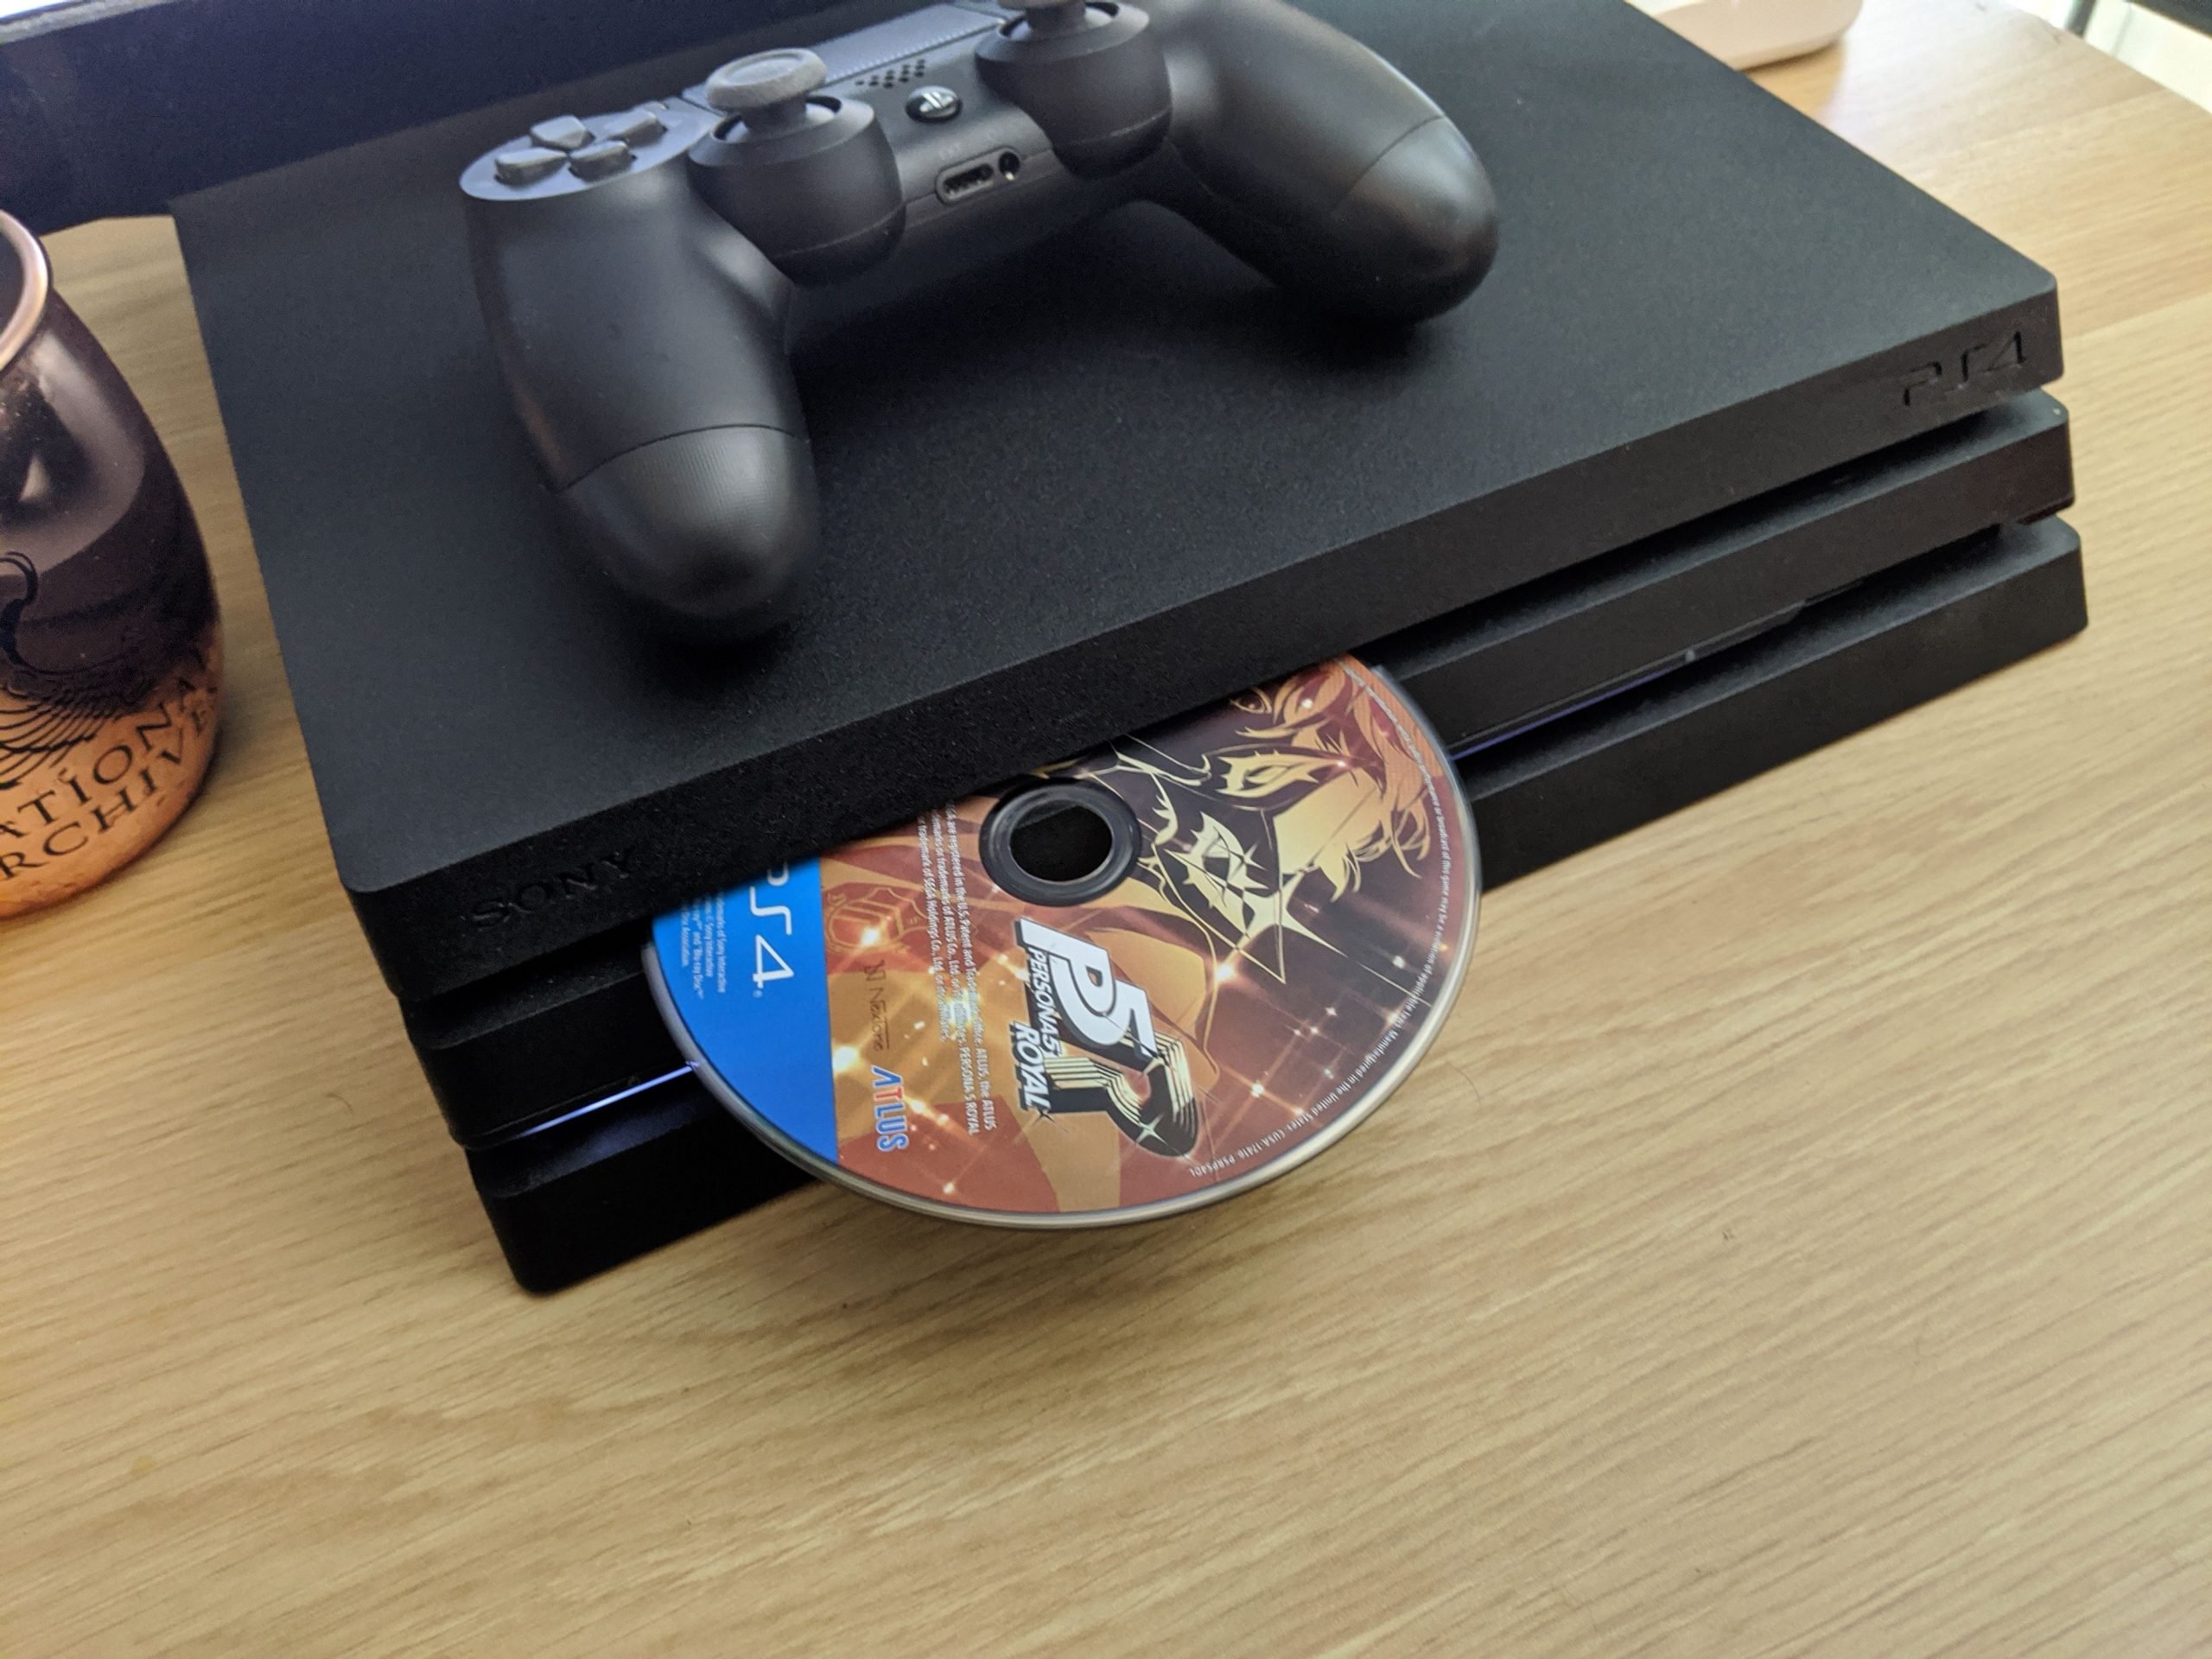 How To Open Ps4 Disc Drive